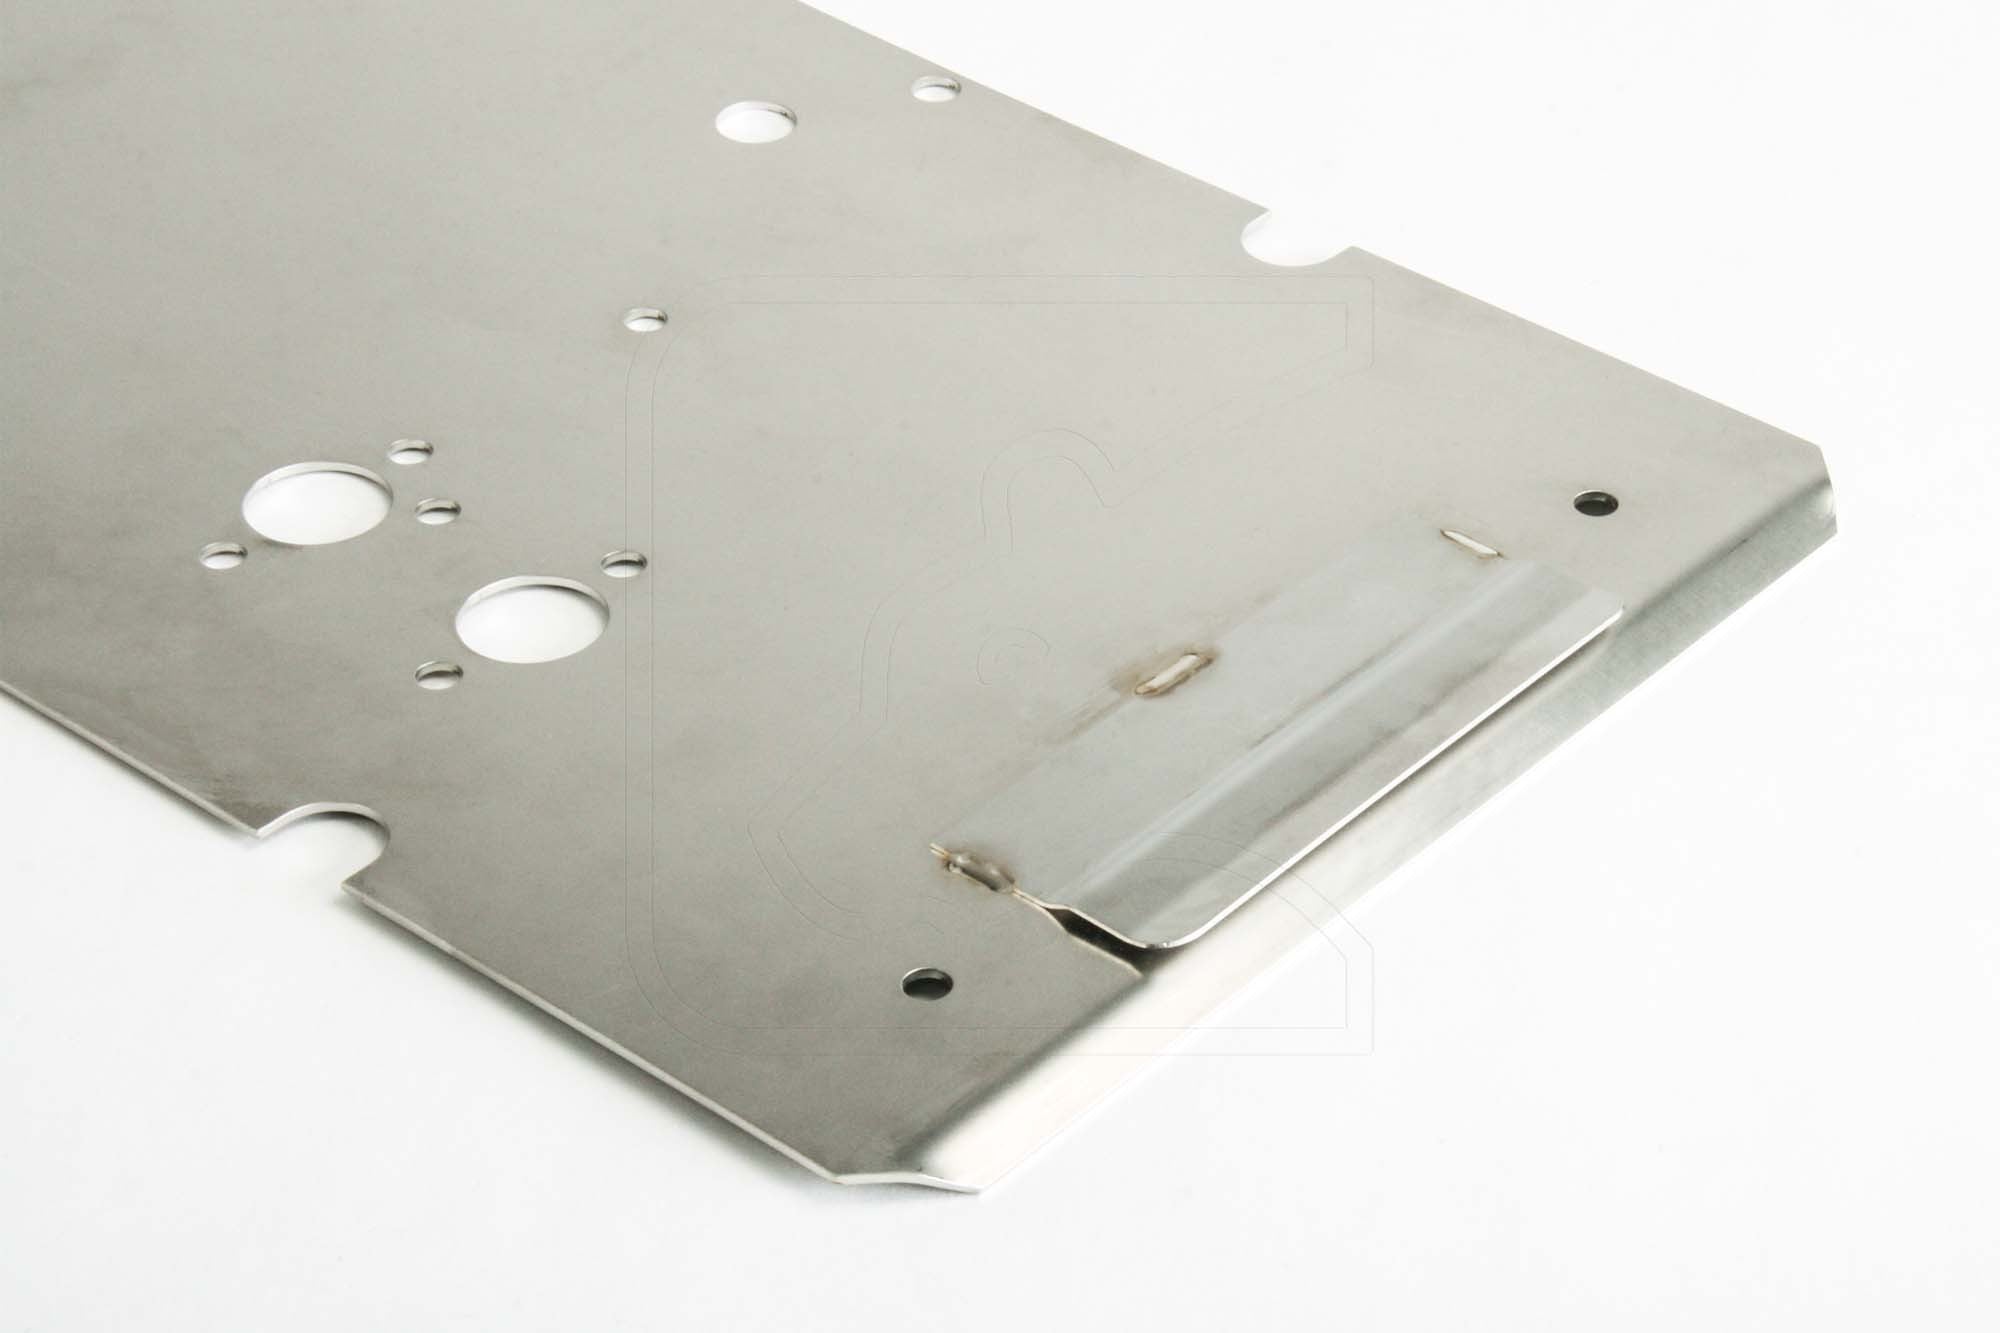 Mounting Plate for heater (Cubby Box Heater Base)